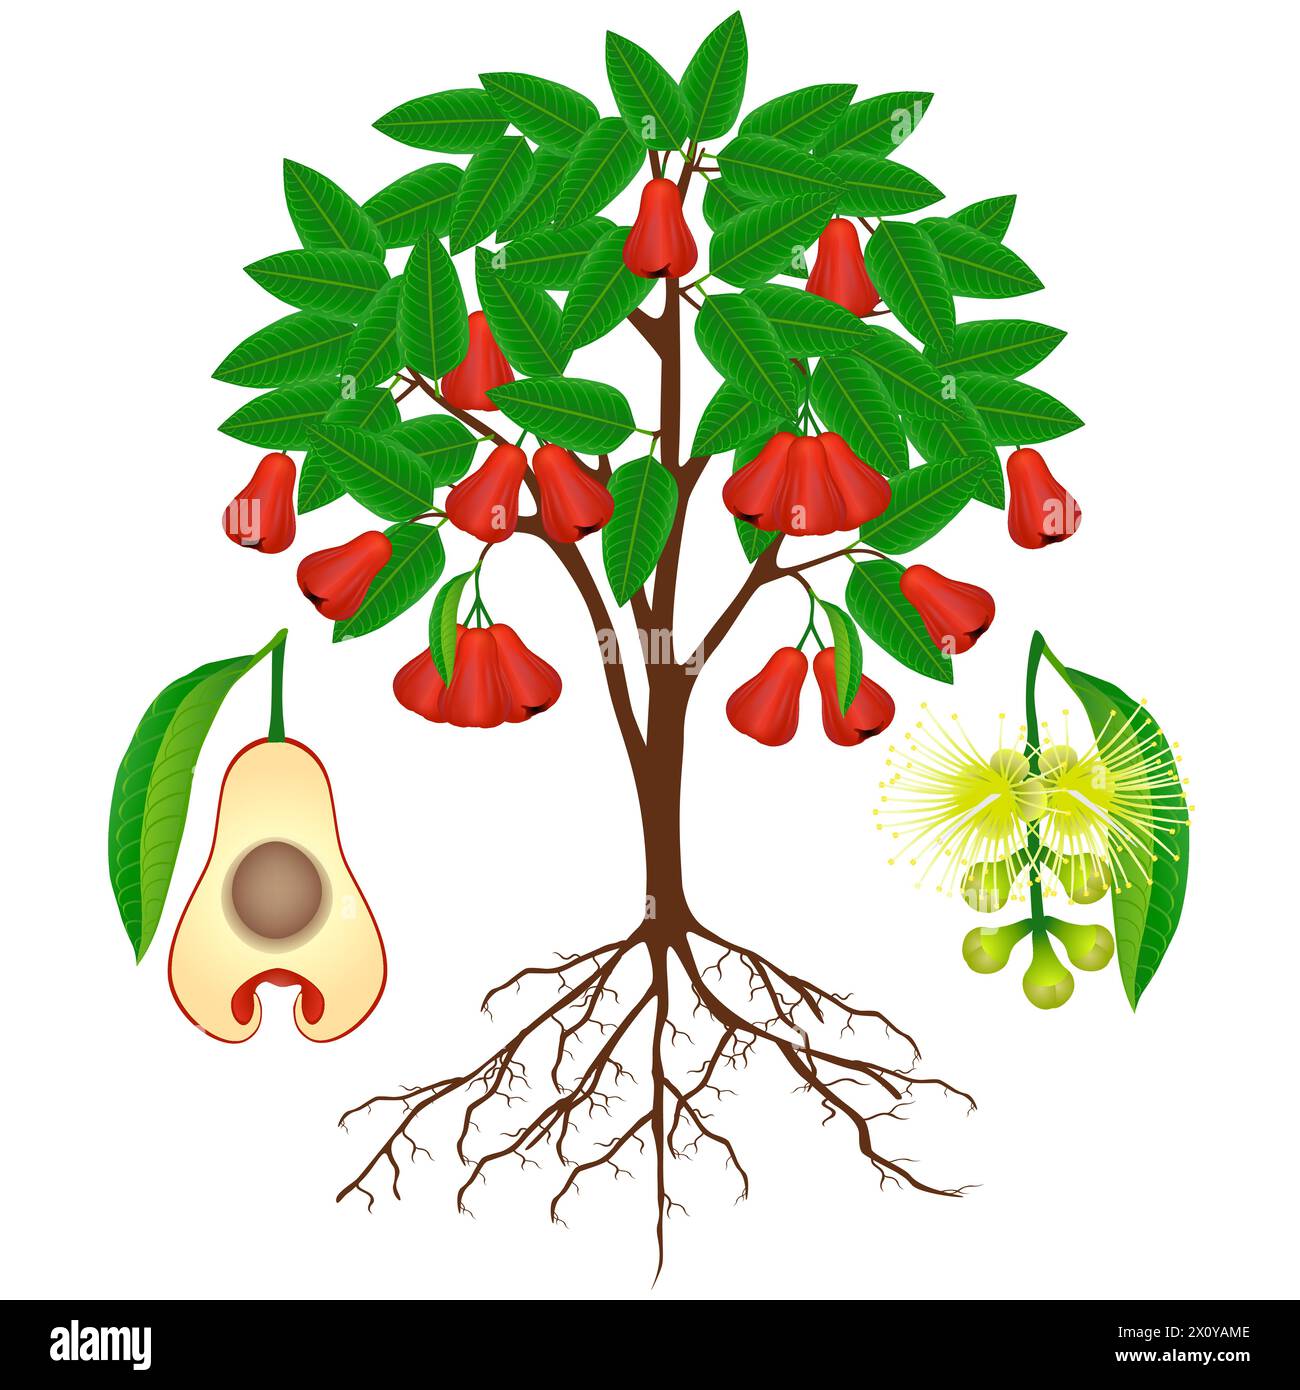 Rose apple plant with fruits and flowers on white. Stock Vector